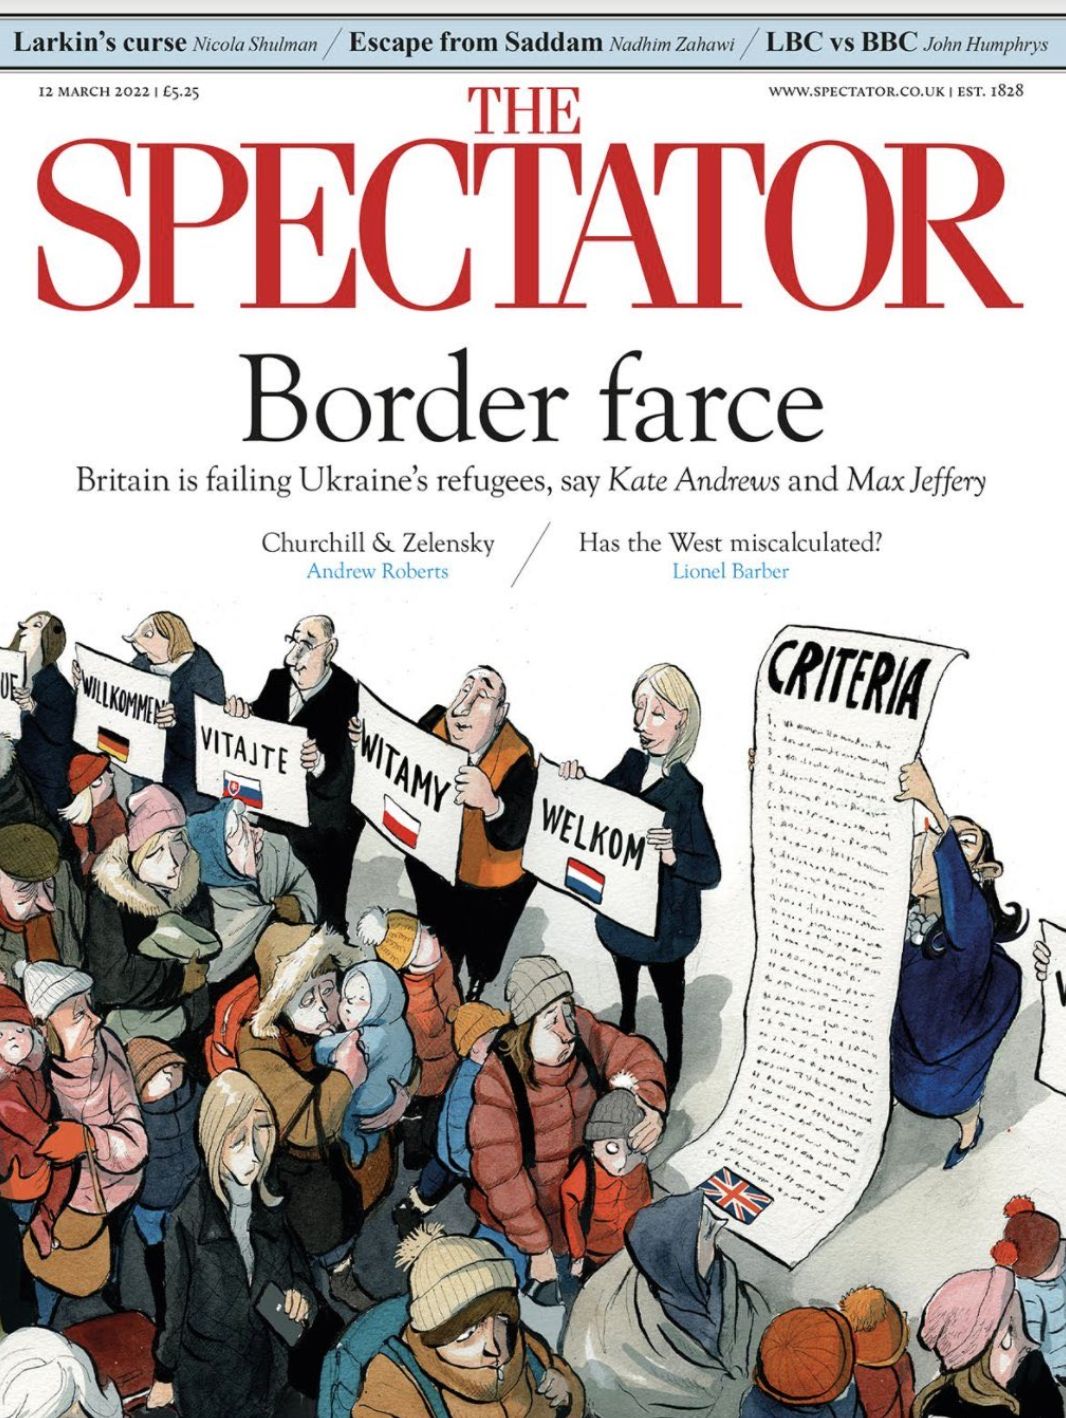 The Spectator's damning front cover